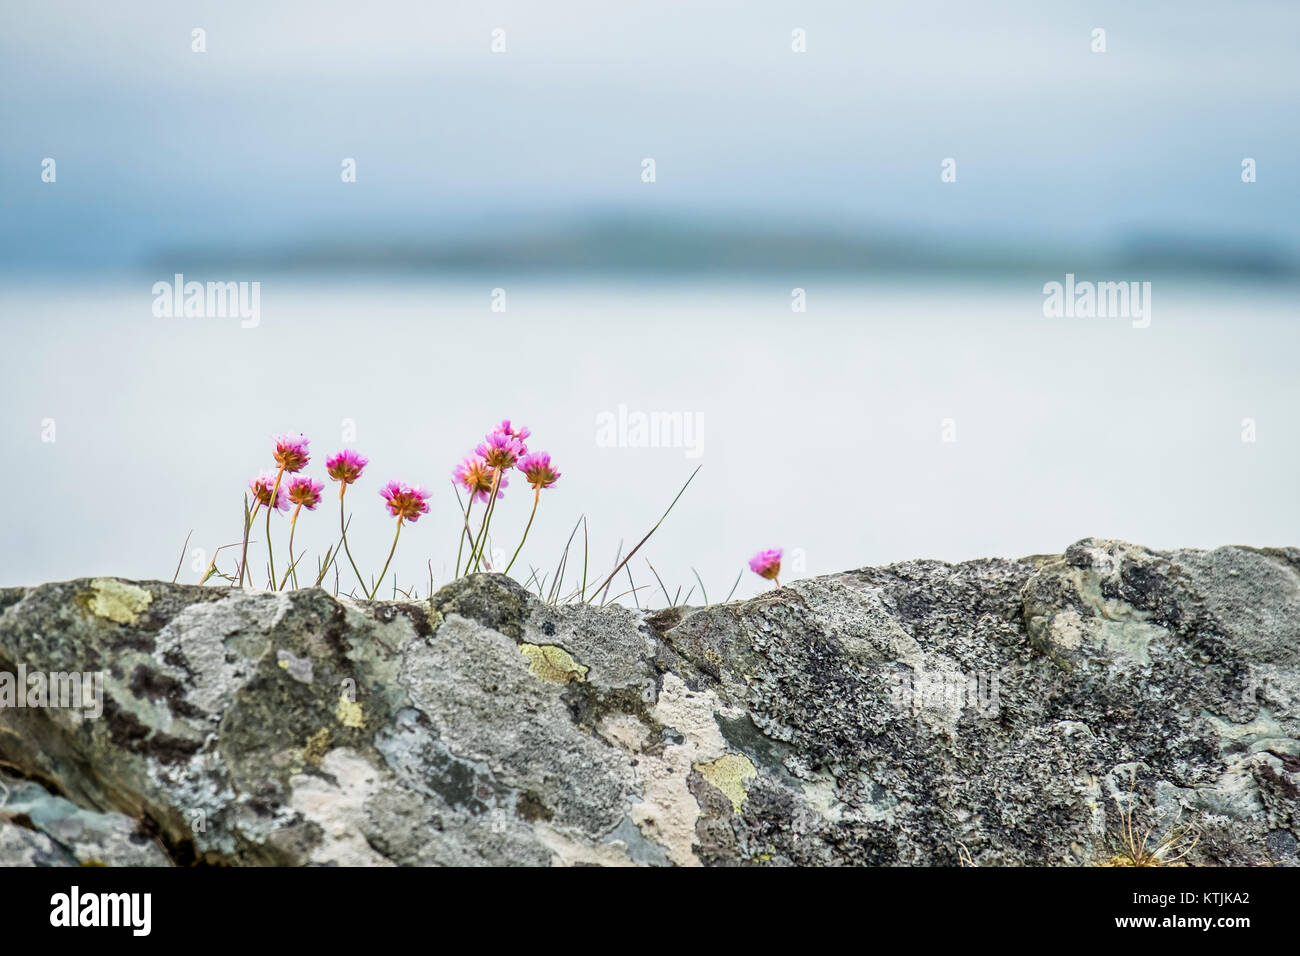 Wild coastal flowers growing on rocks on the shores in Scotland Stock Photo